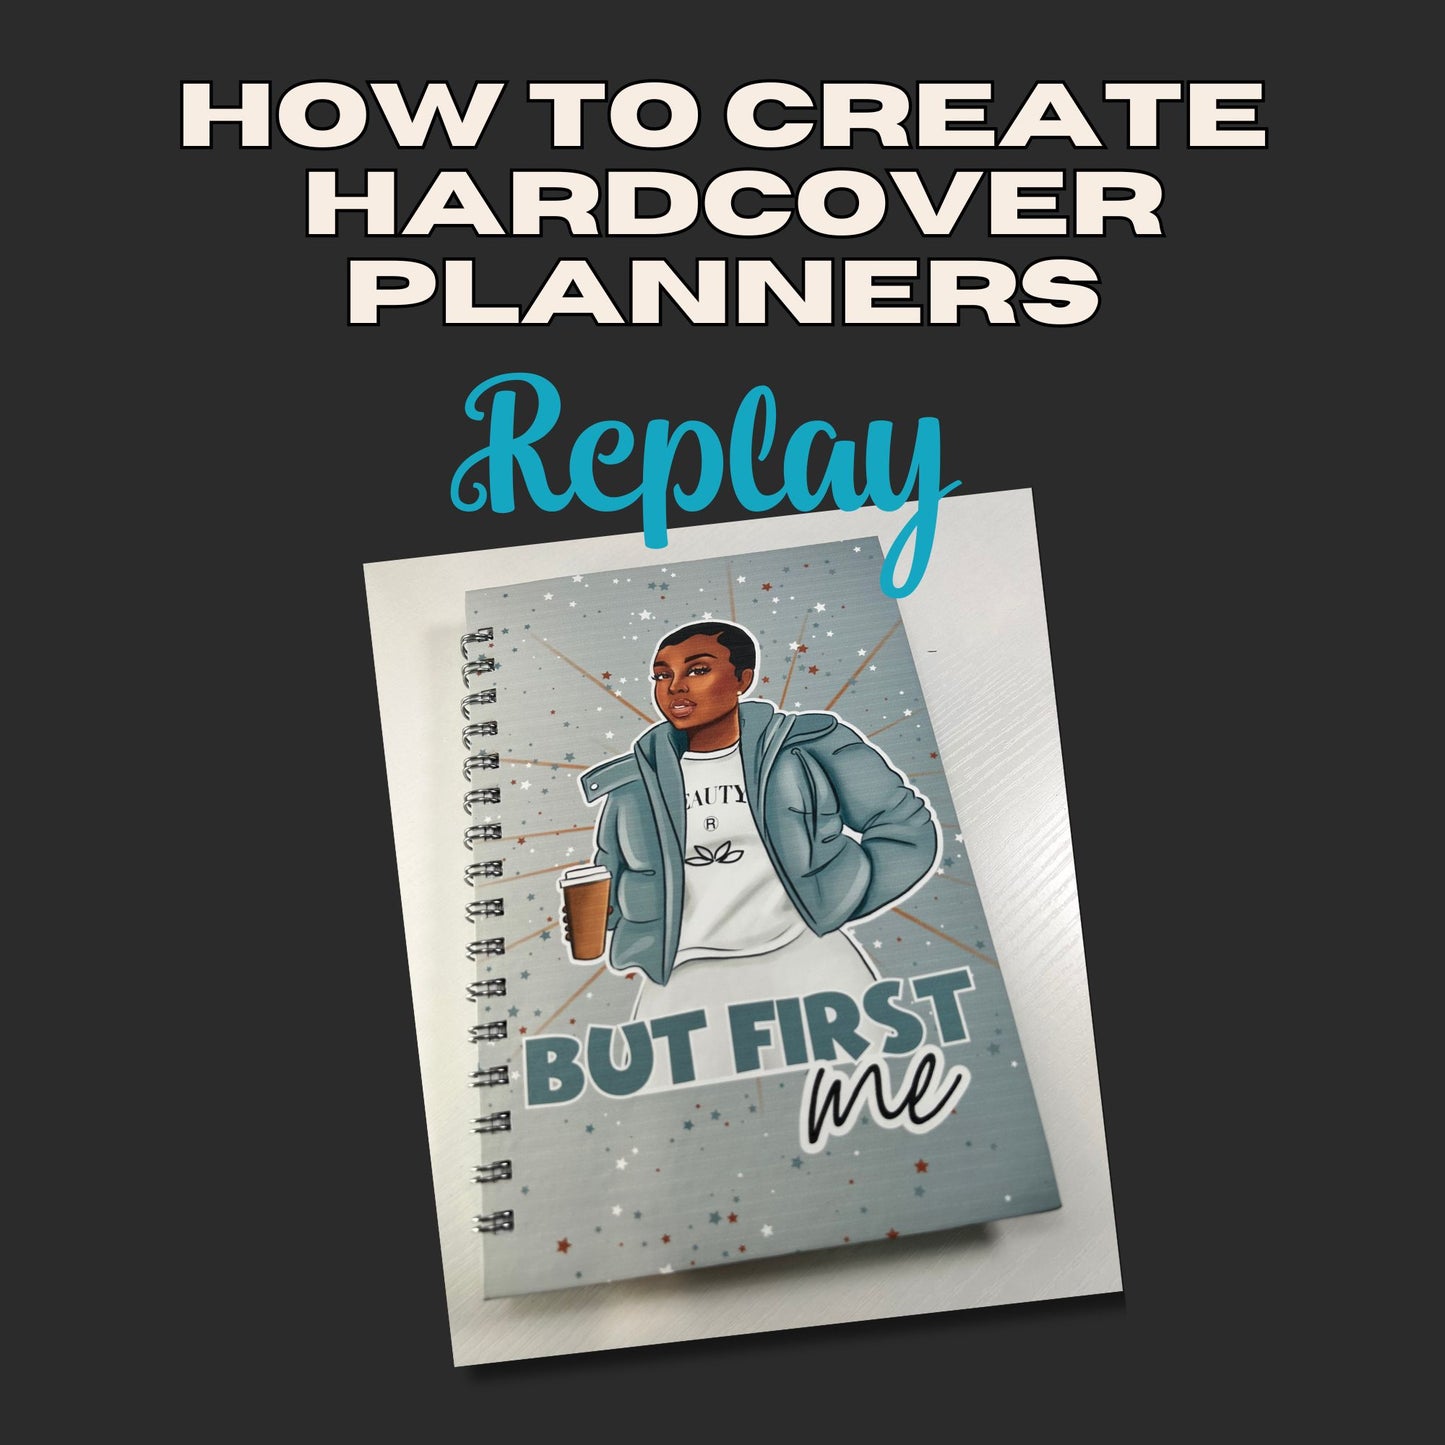 Creating Hardcover Planners-REPLAY